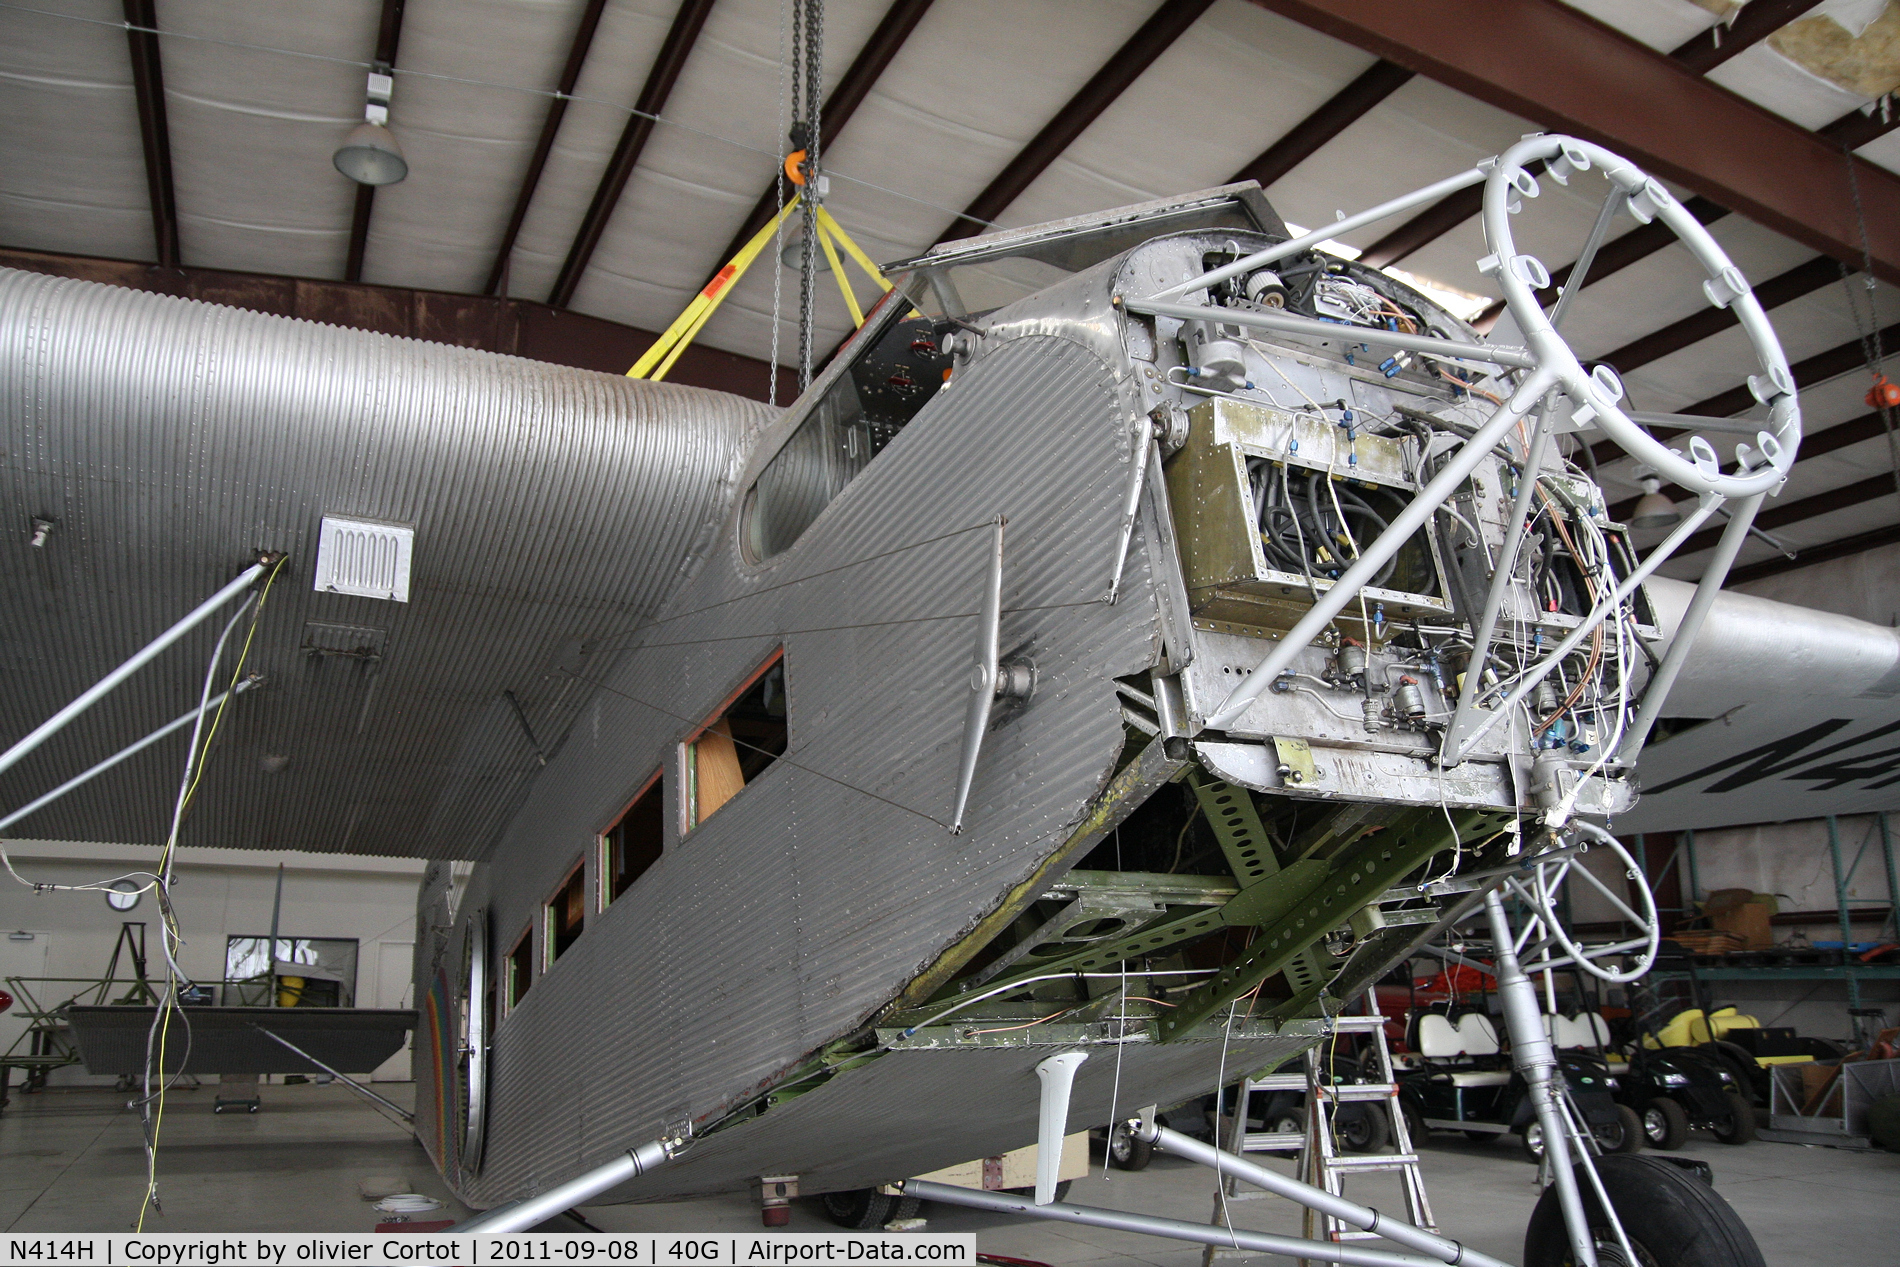 N414H, 1929 Ford 5-AT-C Tri-Motor C/N 74, Working on the engine craddles replacments, the aircraft is due to fly in 2012